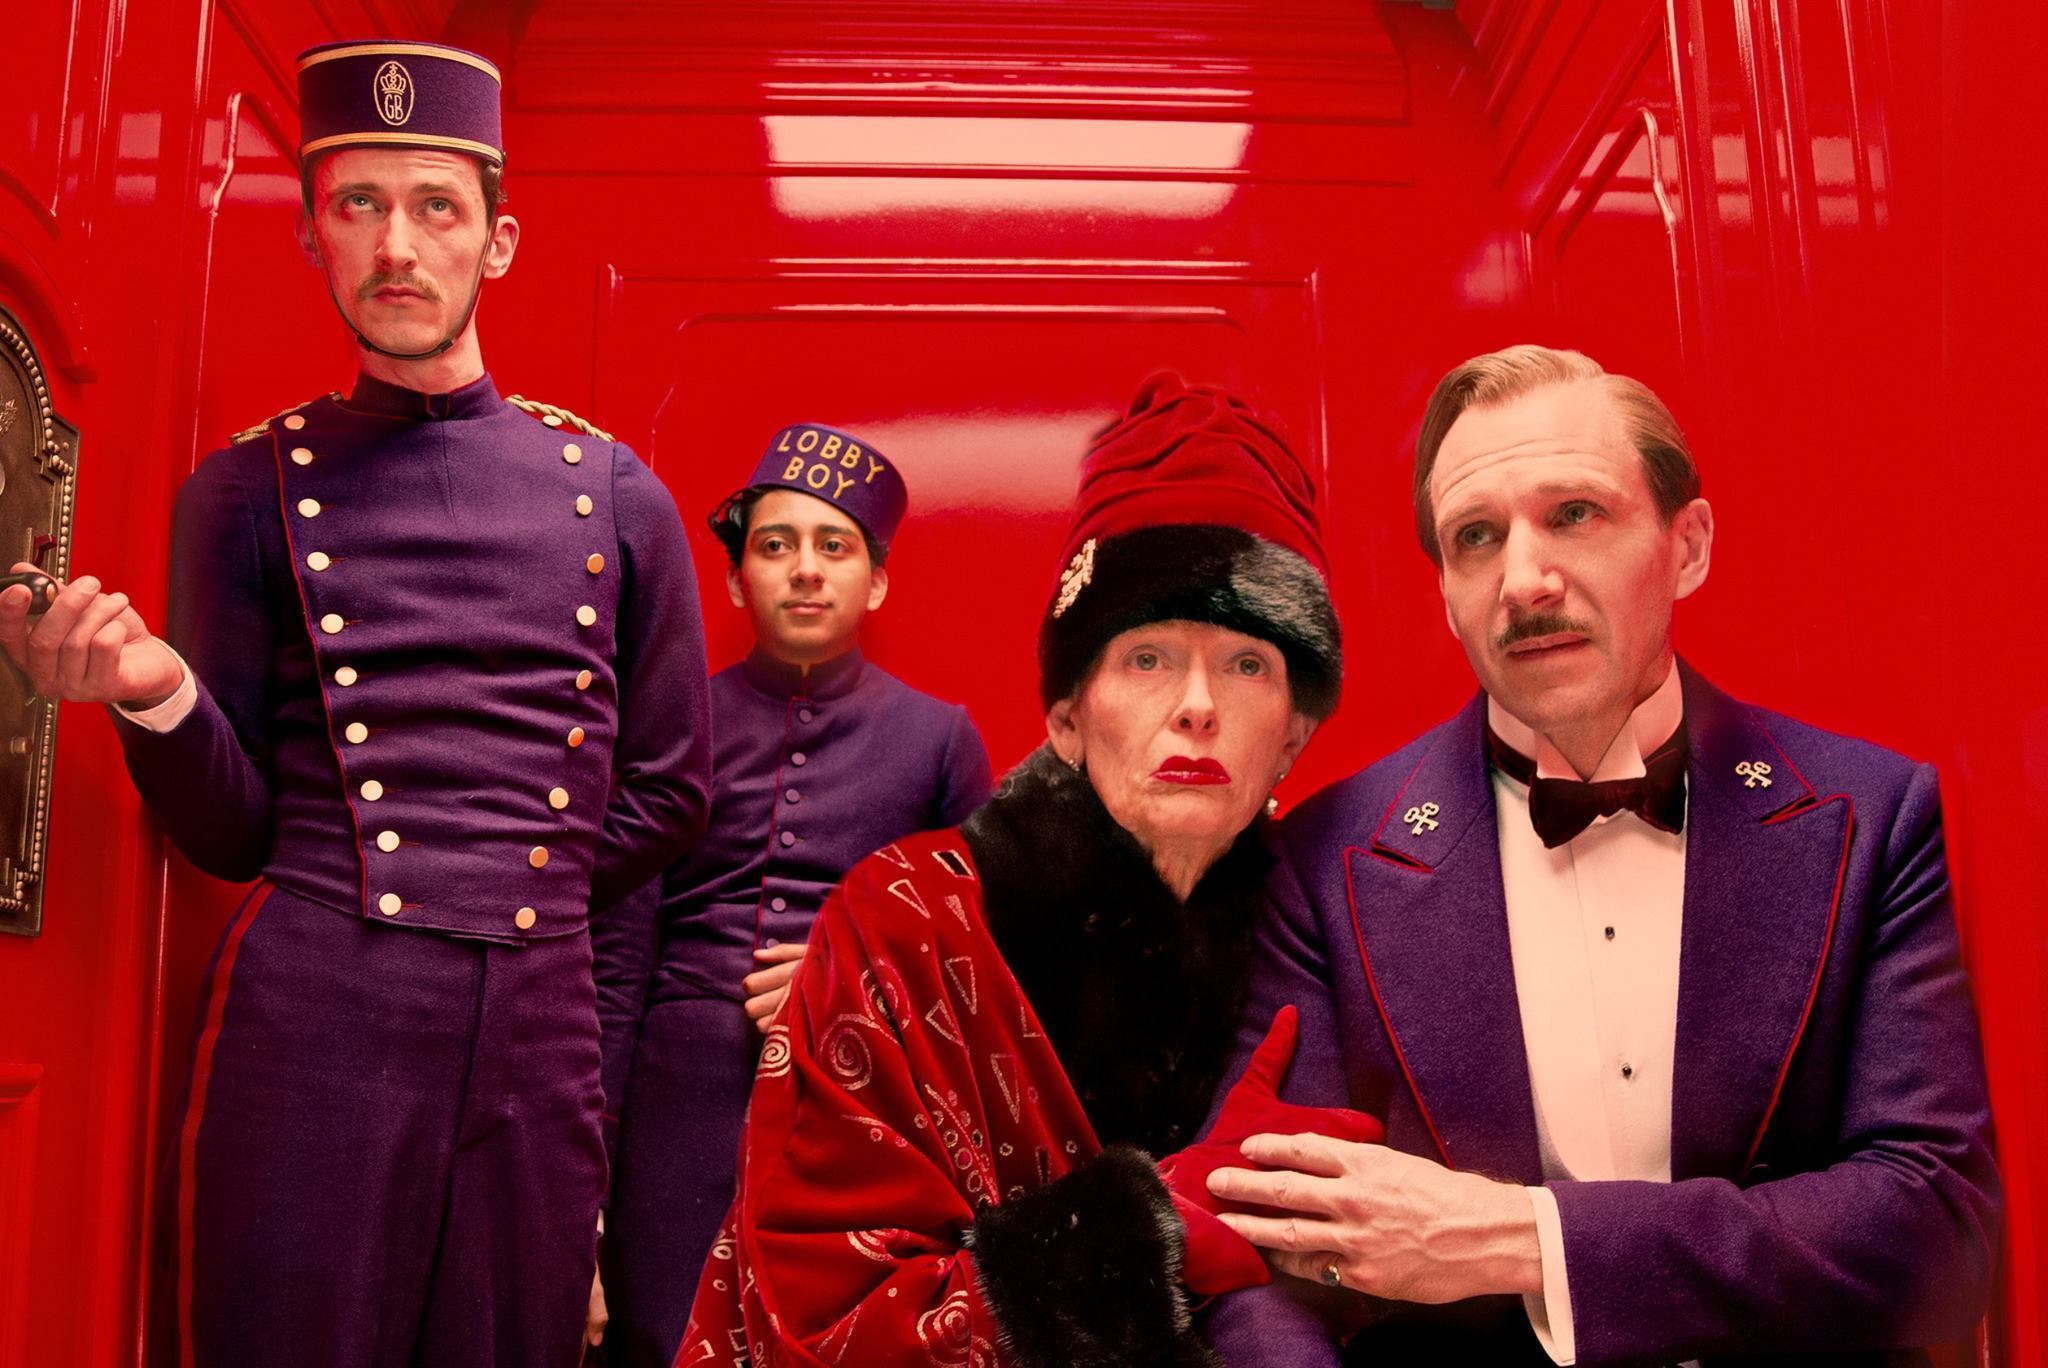 a film still from The Grand Budapest Hotel